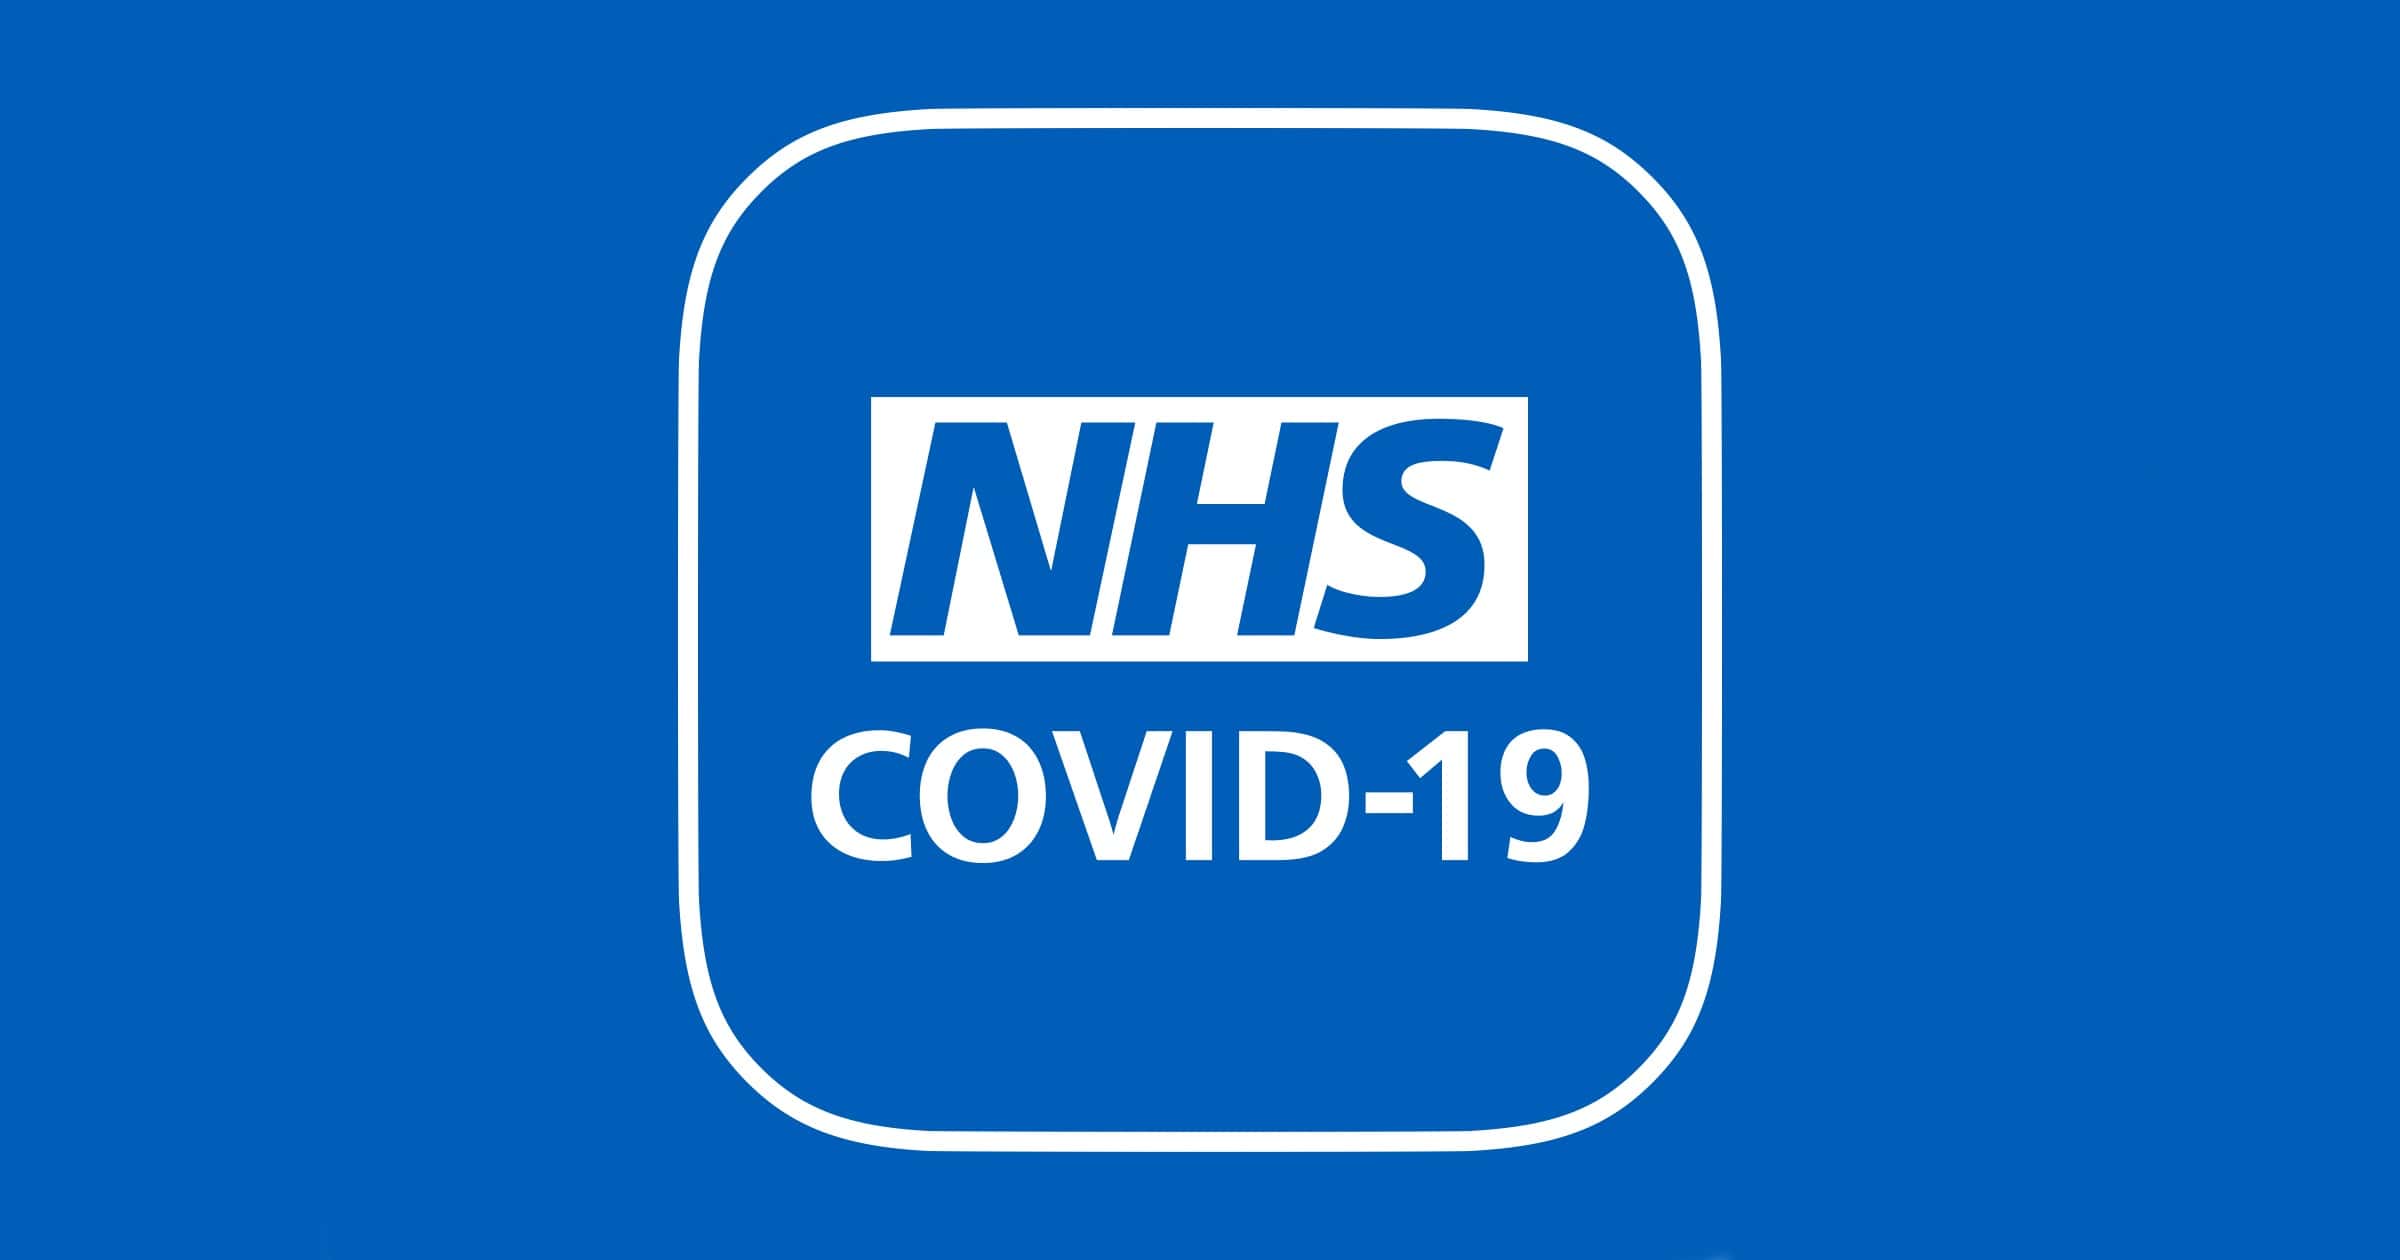 UK Launches its COVID-19 App for Exposure Notifications